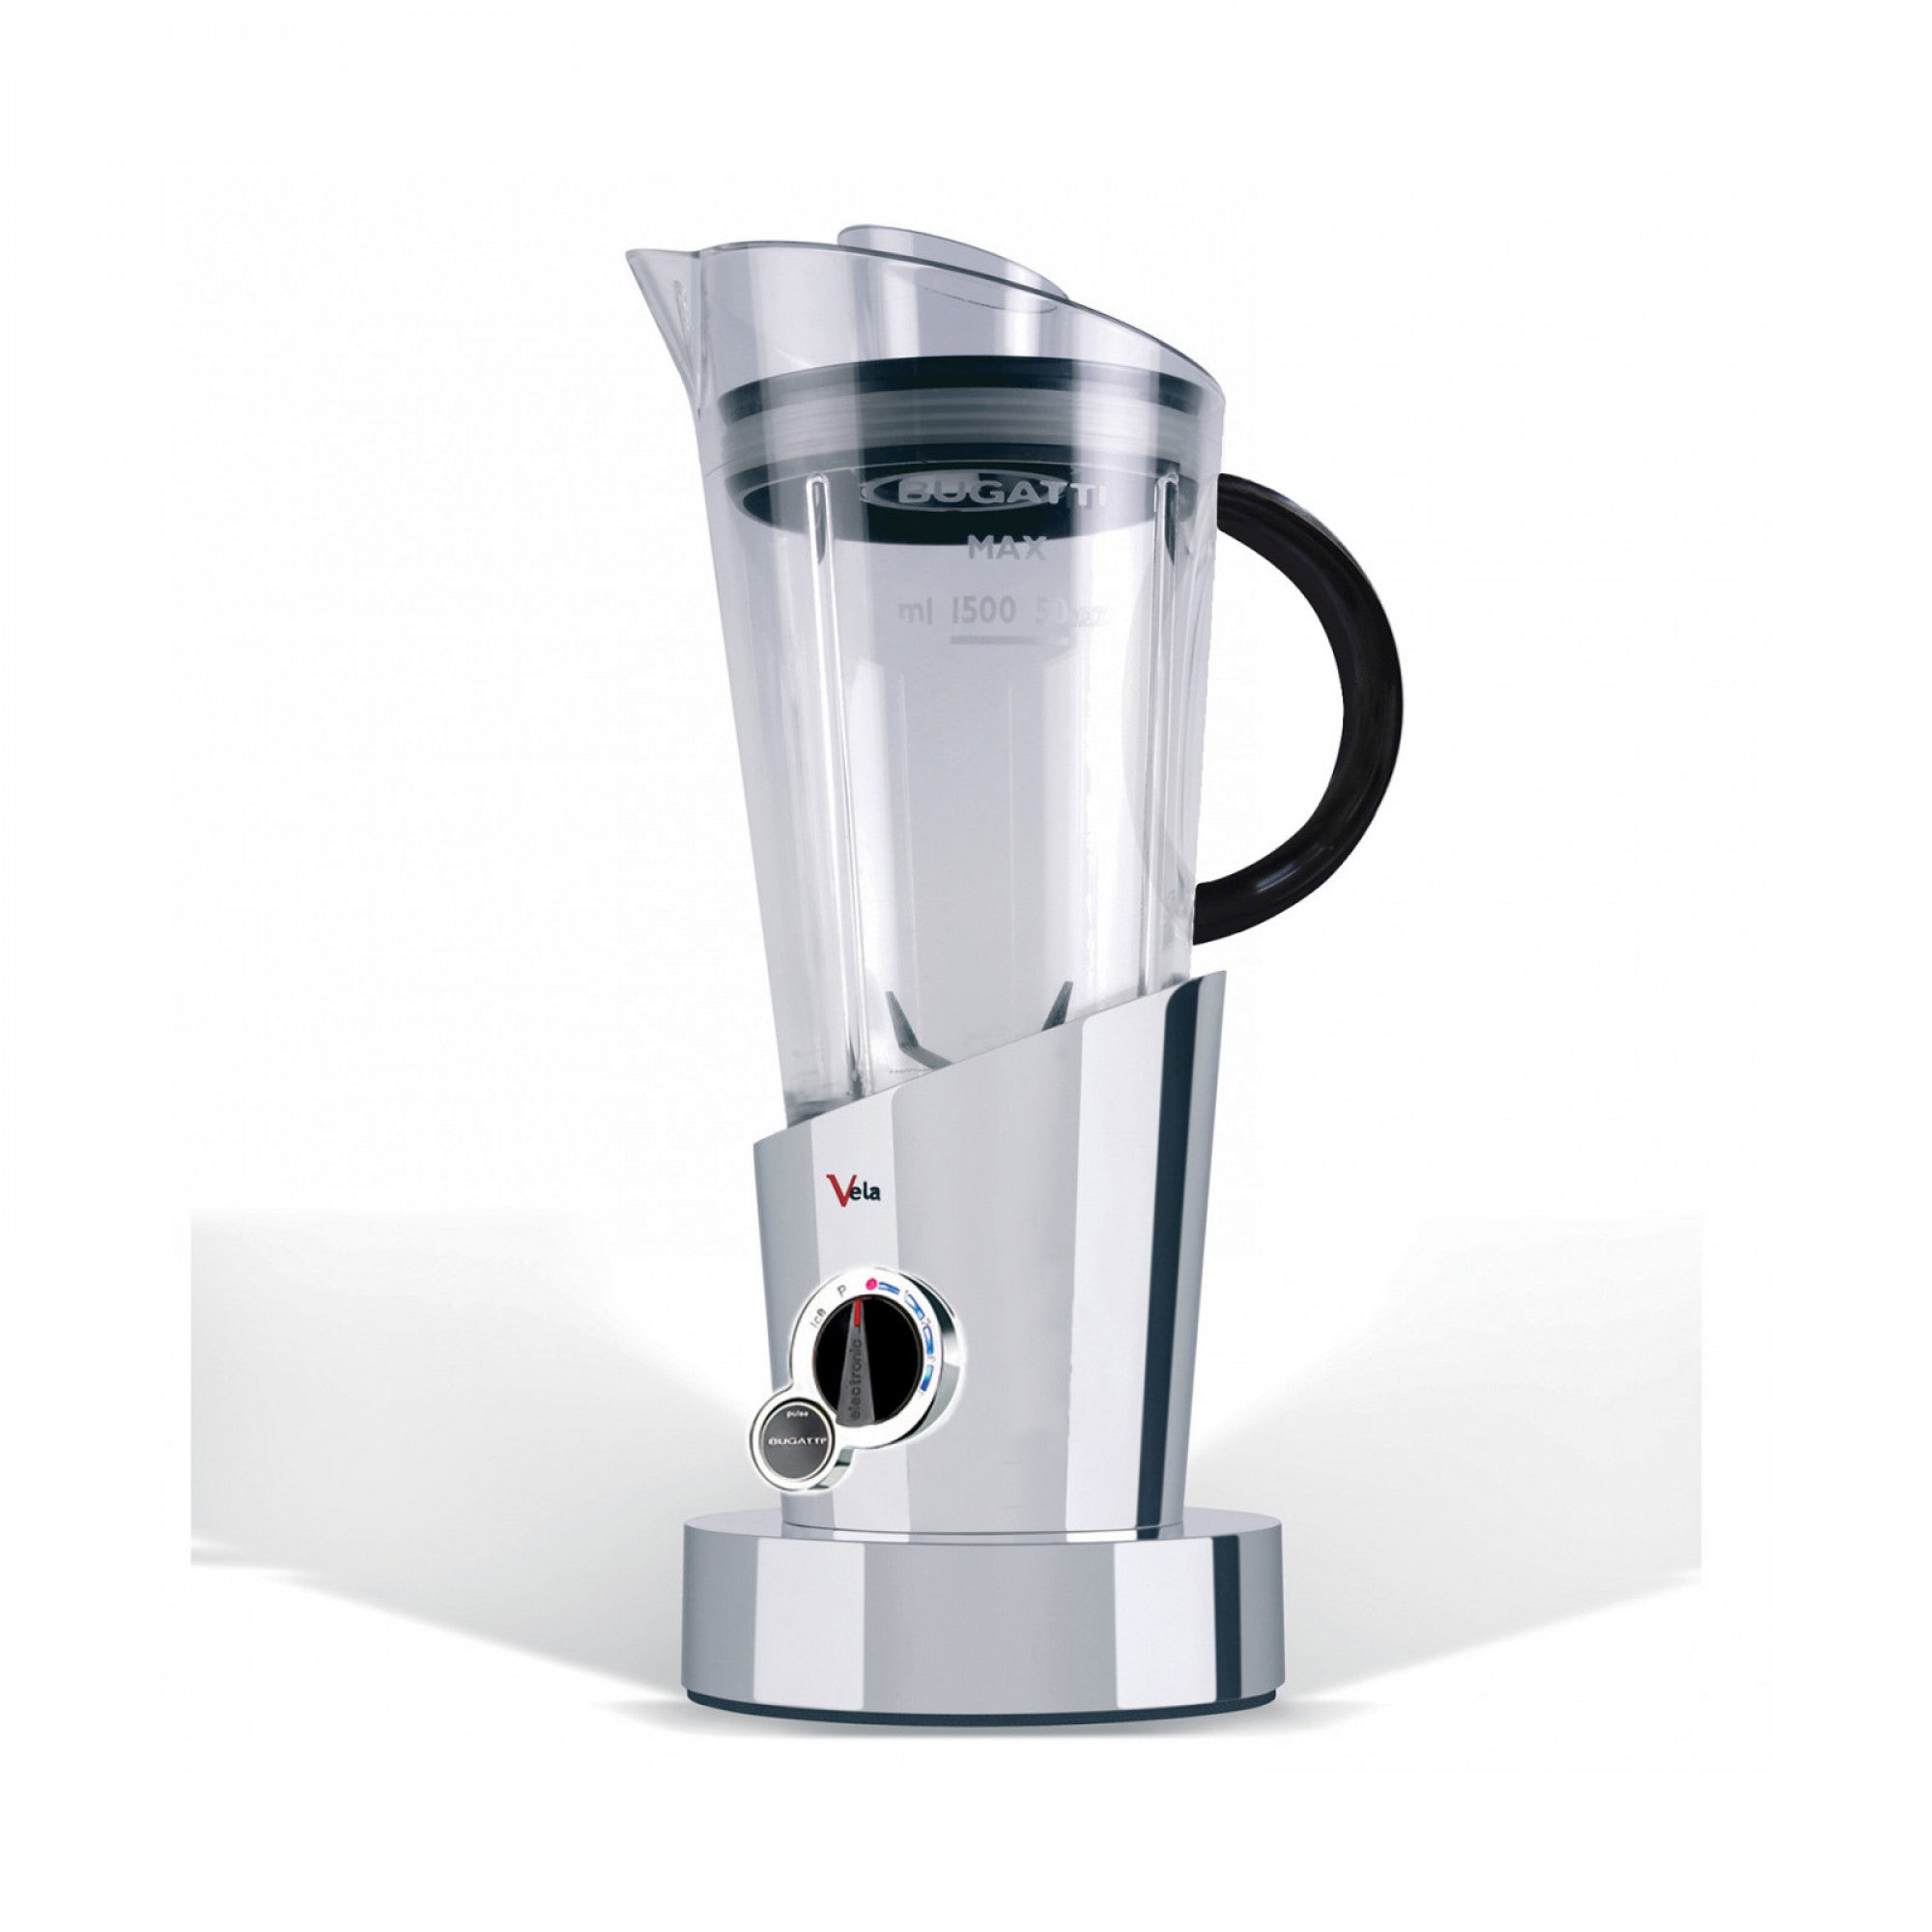 BUGATTI, Vela Evolution, Electric Blender for Smoothies and Smoothies, Ice Crusher Function Included, 4 Speeds, Capacity 1.5 liters, 500 W, Innovative Design